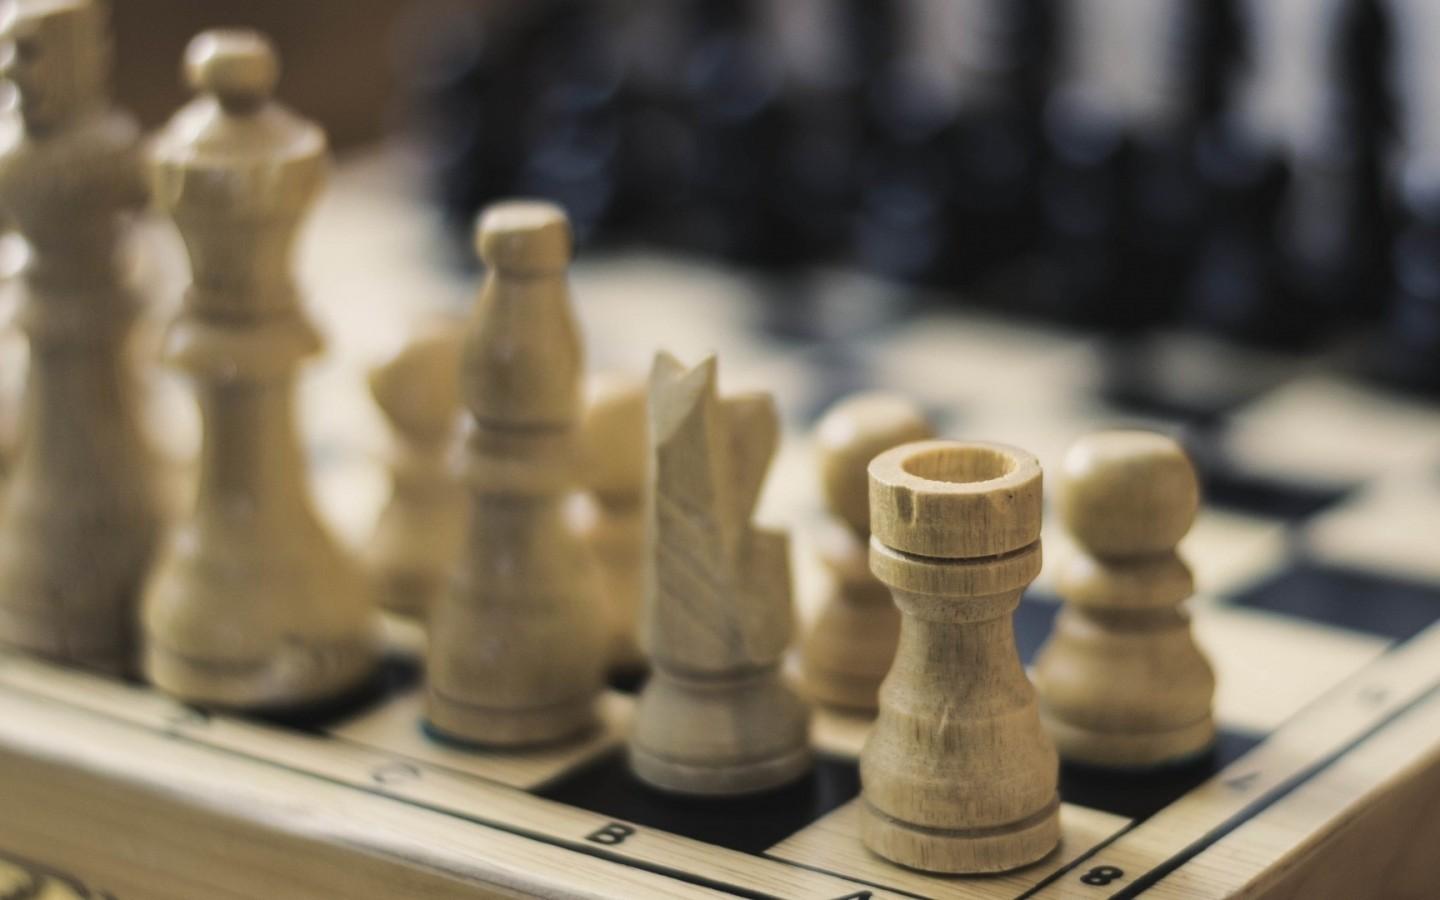 Download 1440x900 Chess, Board Games Wallpaper for MacBook